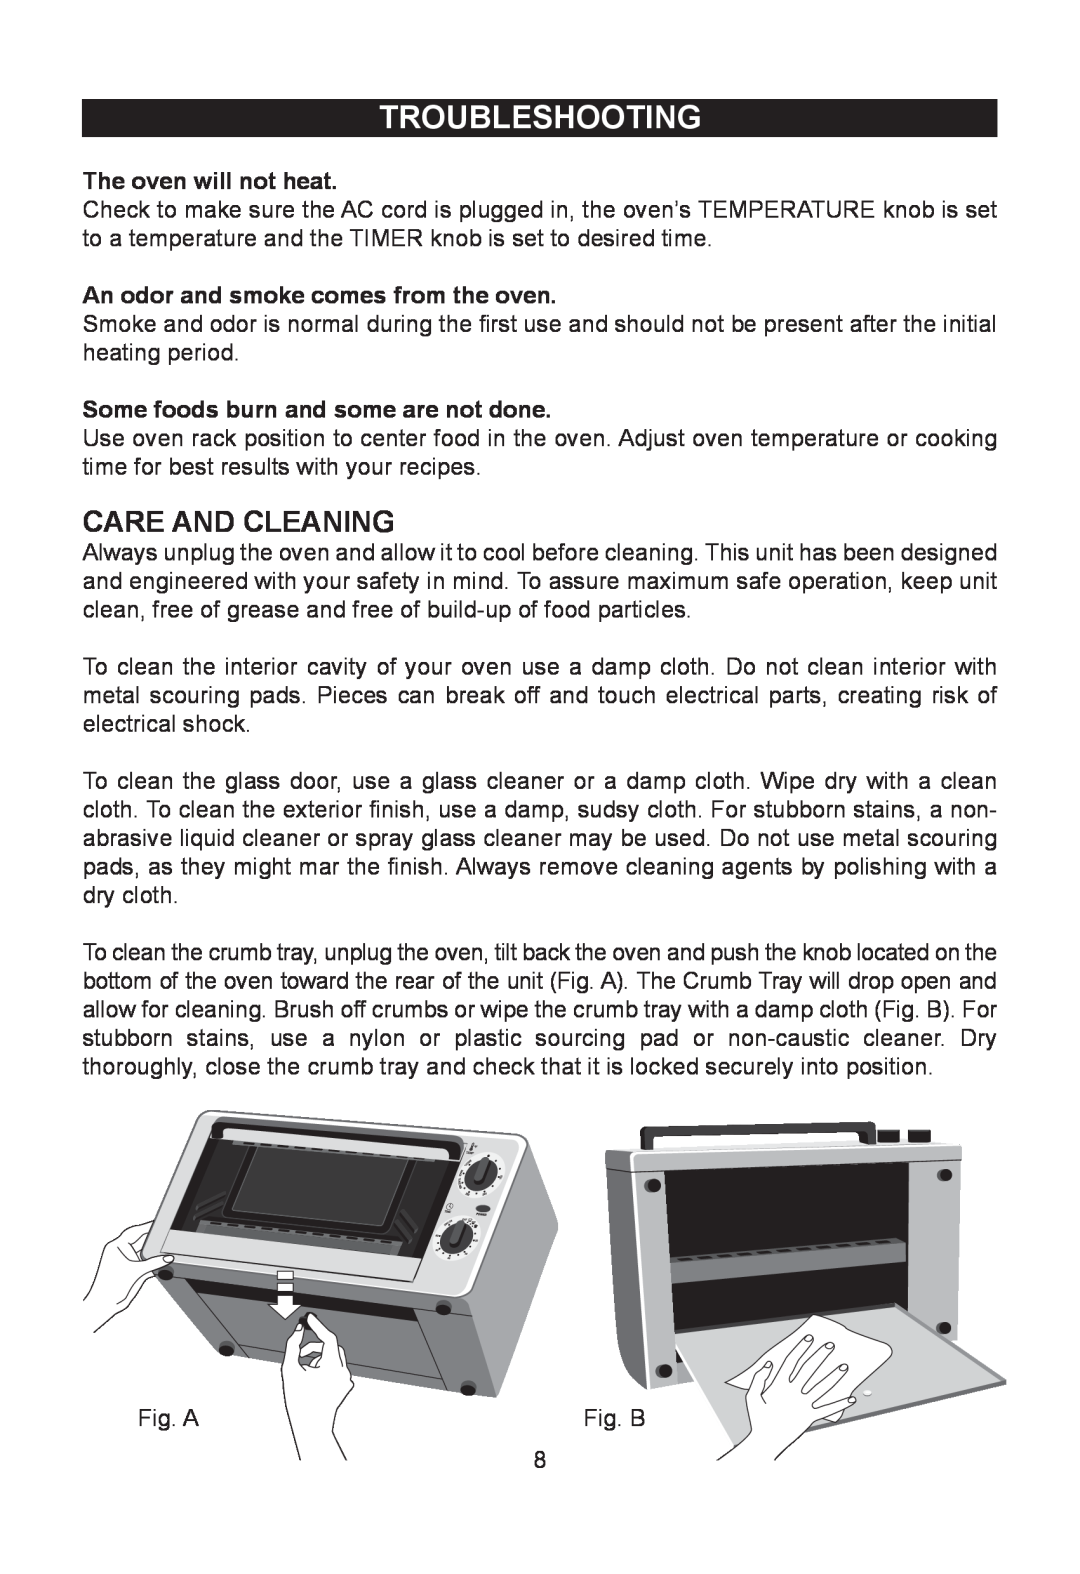 Emerson TOR49 Troubleshooting, Care And Cleaning, The oven will not heat, An odor and smoke comes from the oven 